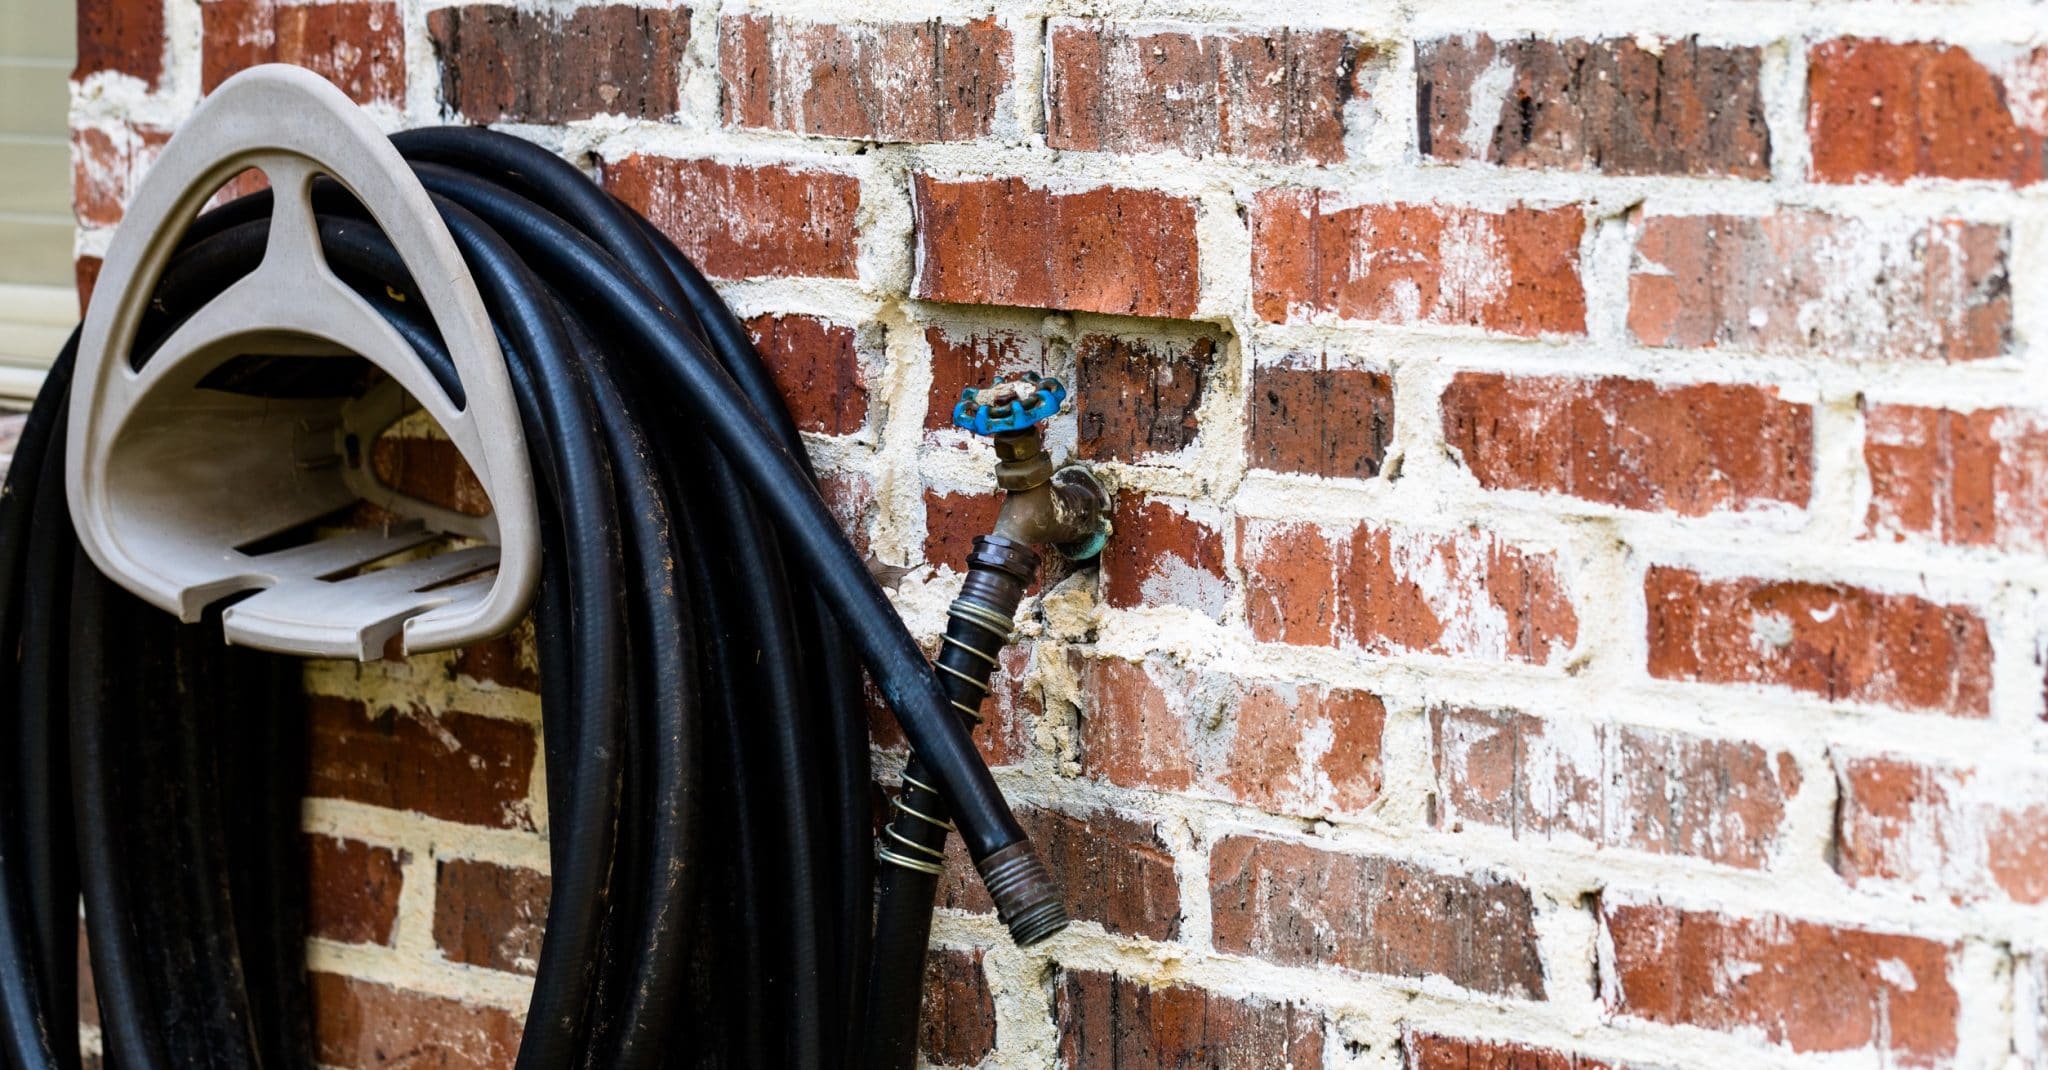 Rubber hose hanging on a brick wall attached to a spigot